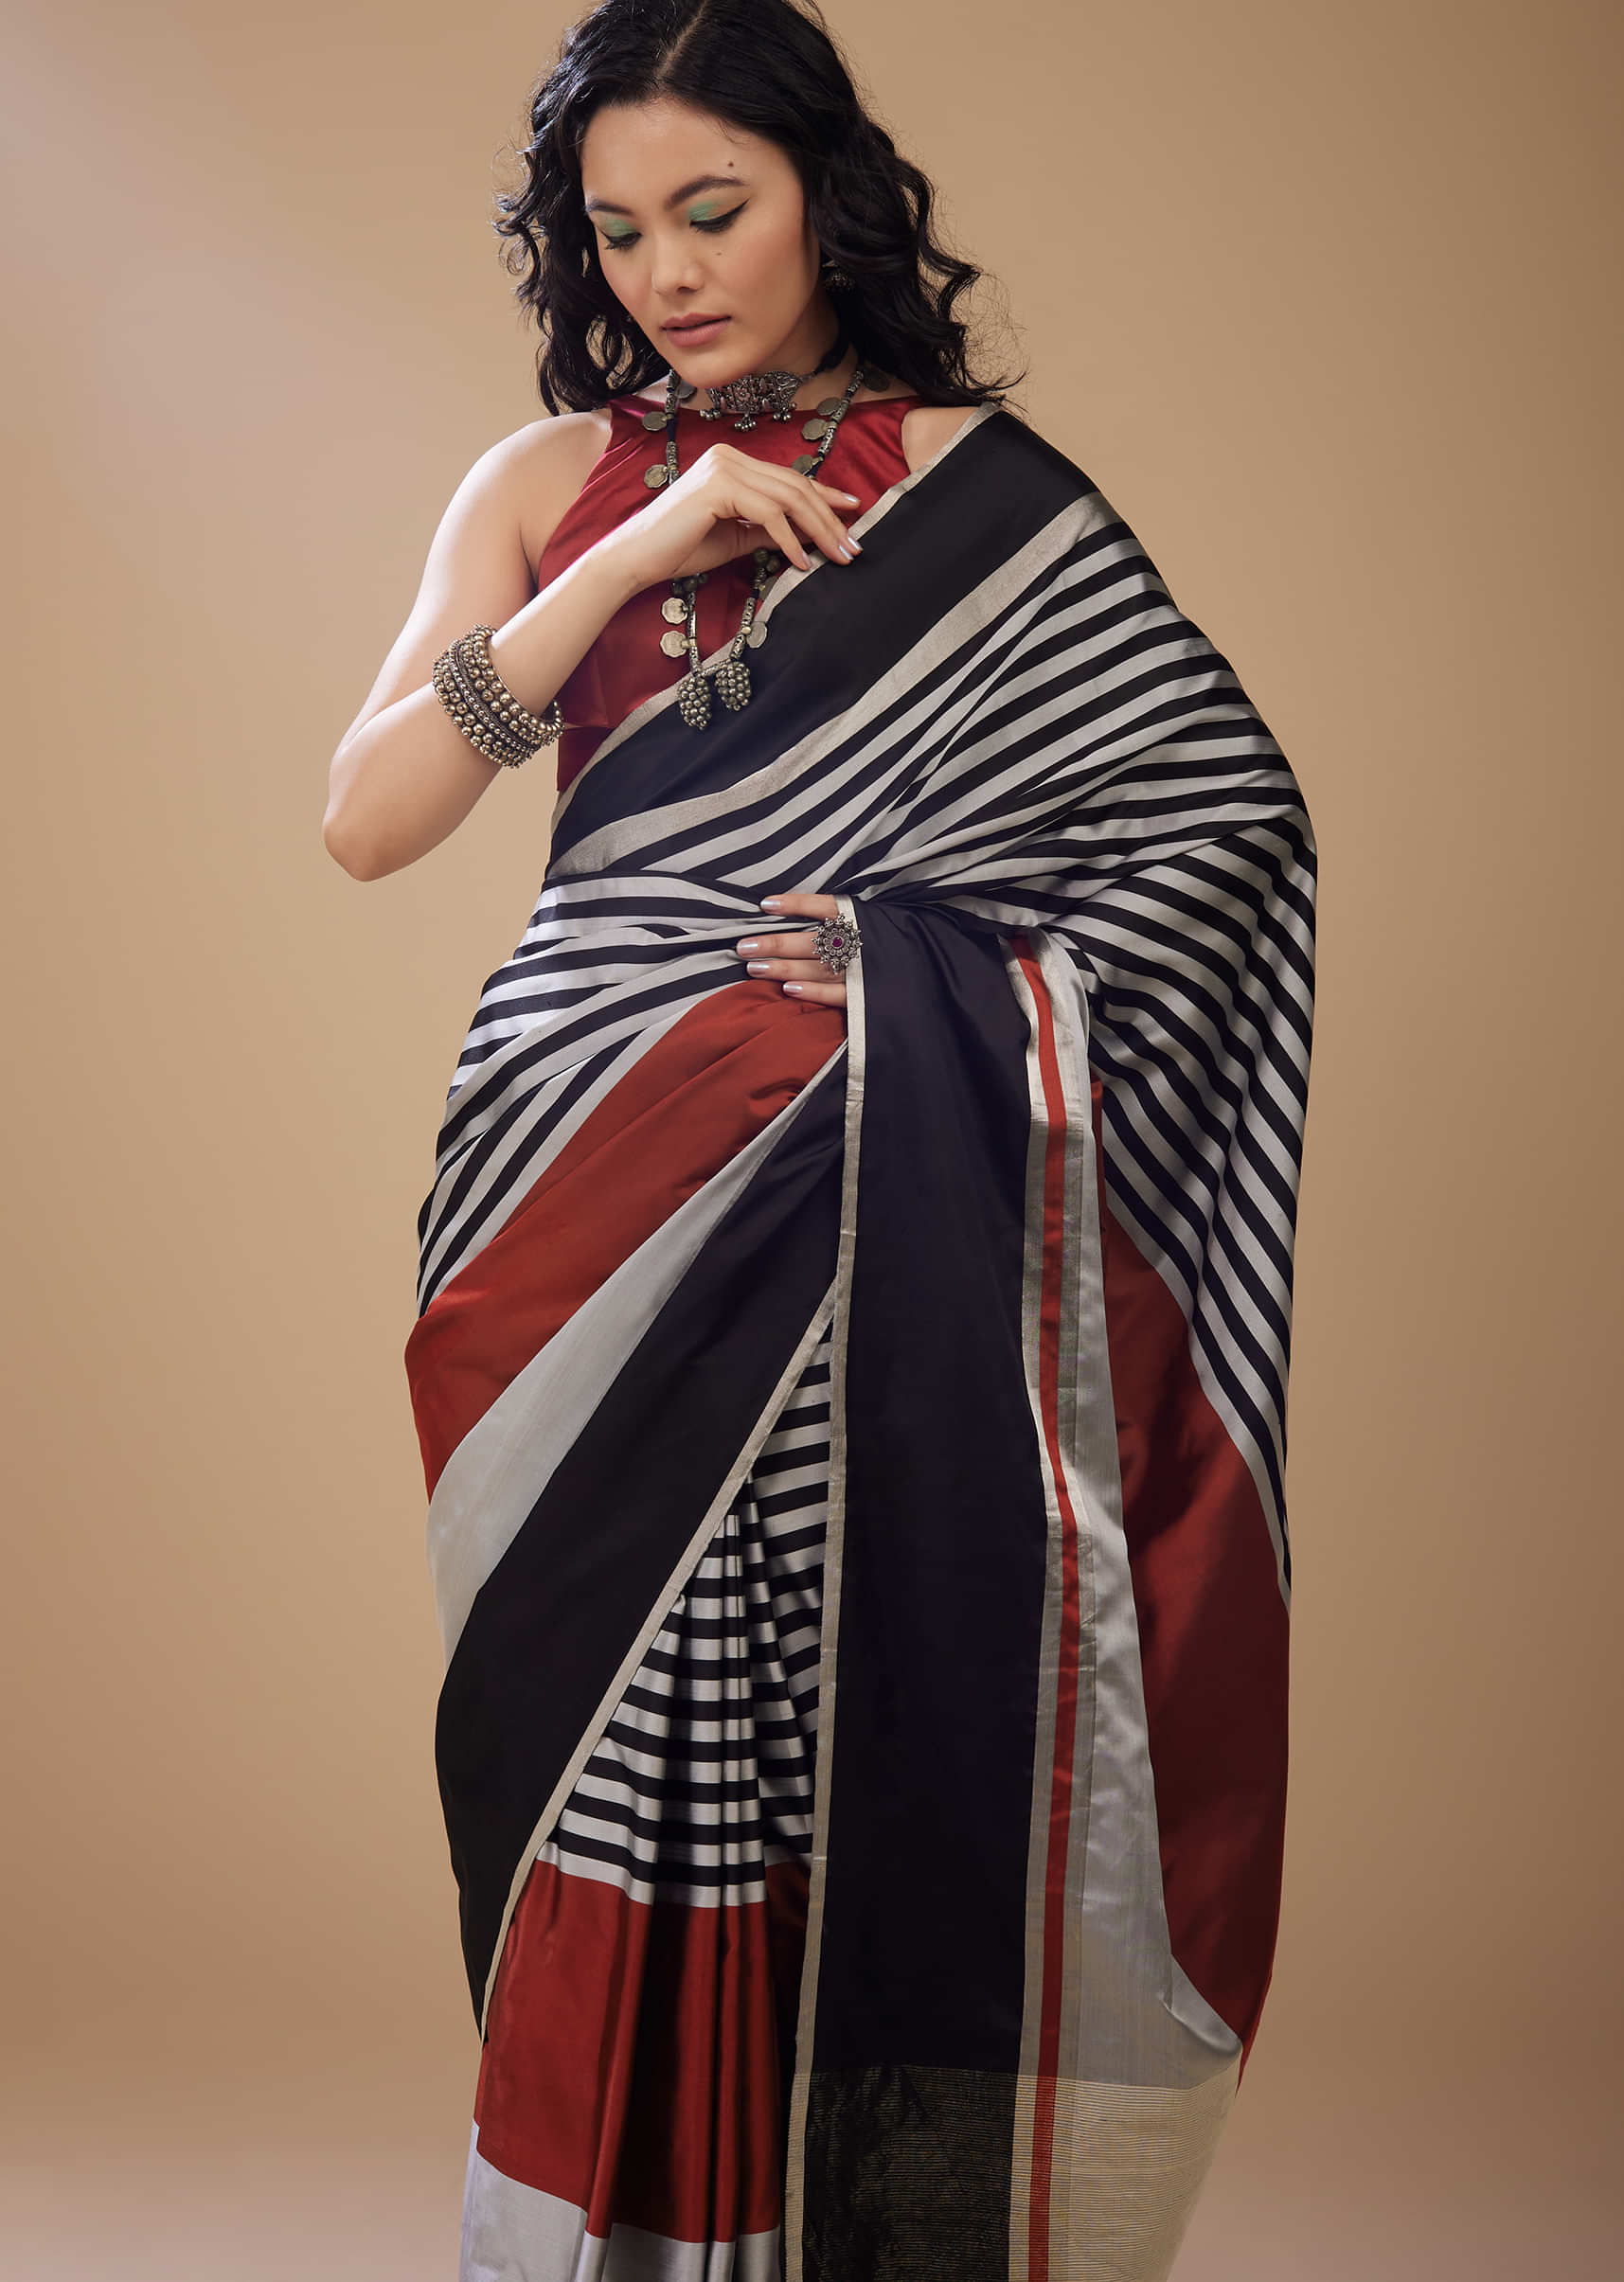 Satin Stripe Print Saree In Black Silver And Maroon Red